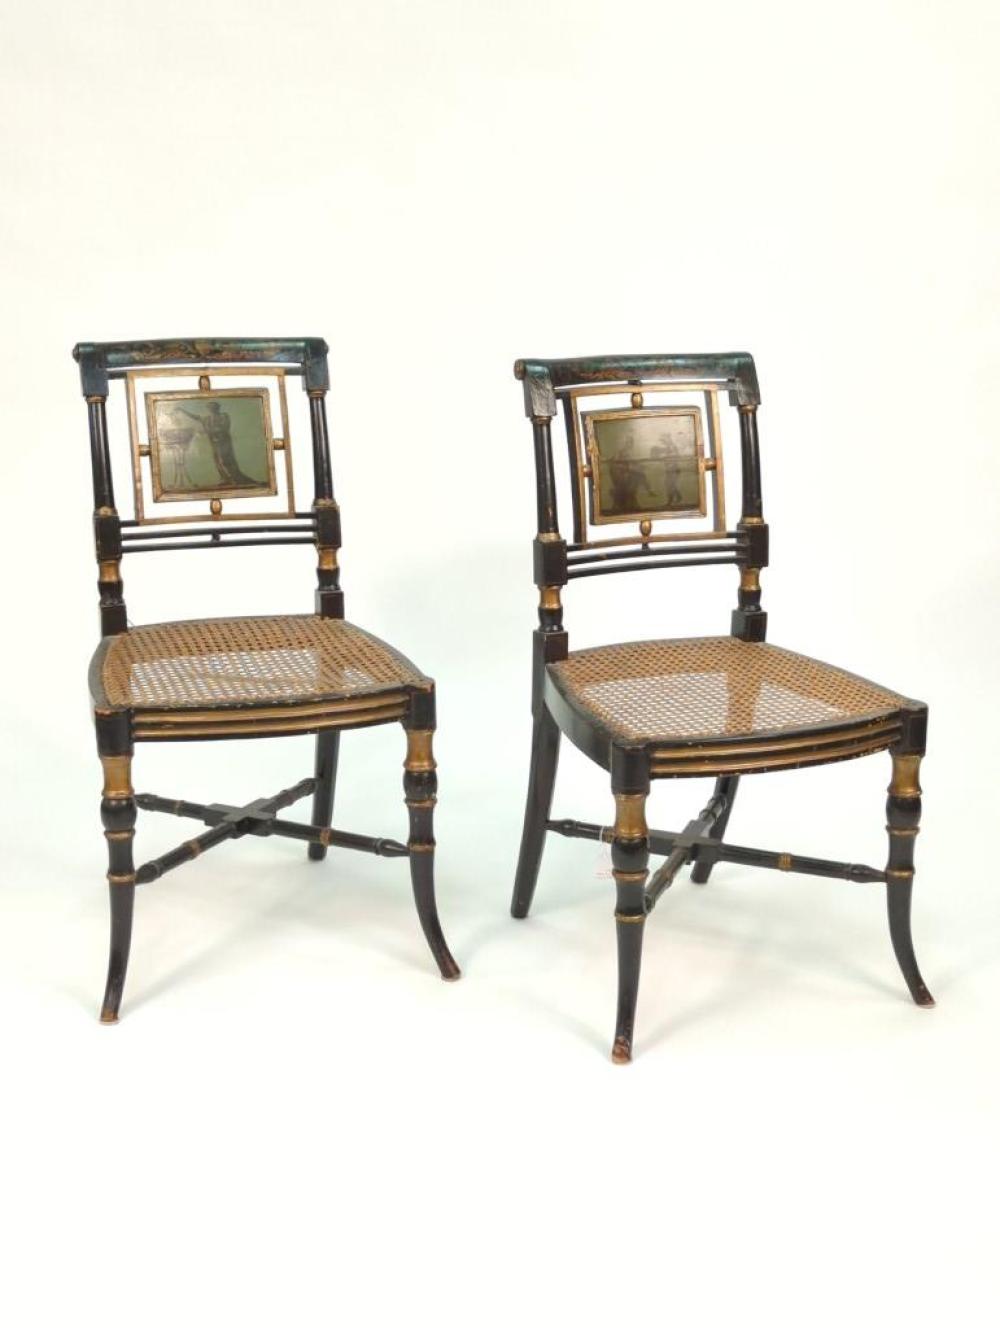 PAIR NEOCLASSICAL EBONIZED AND